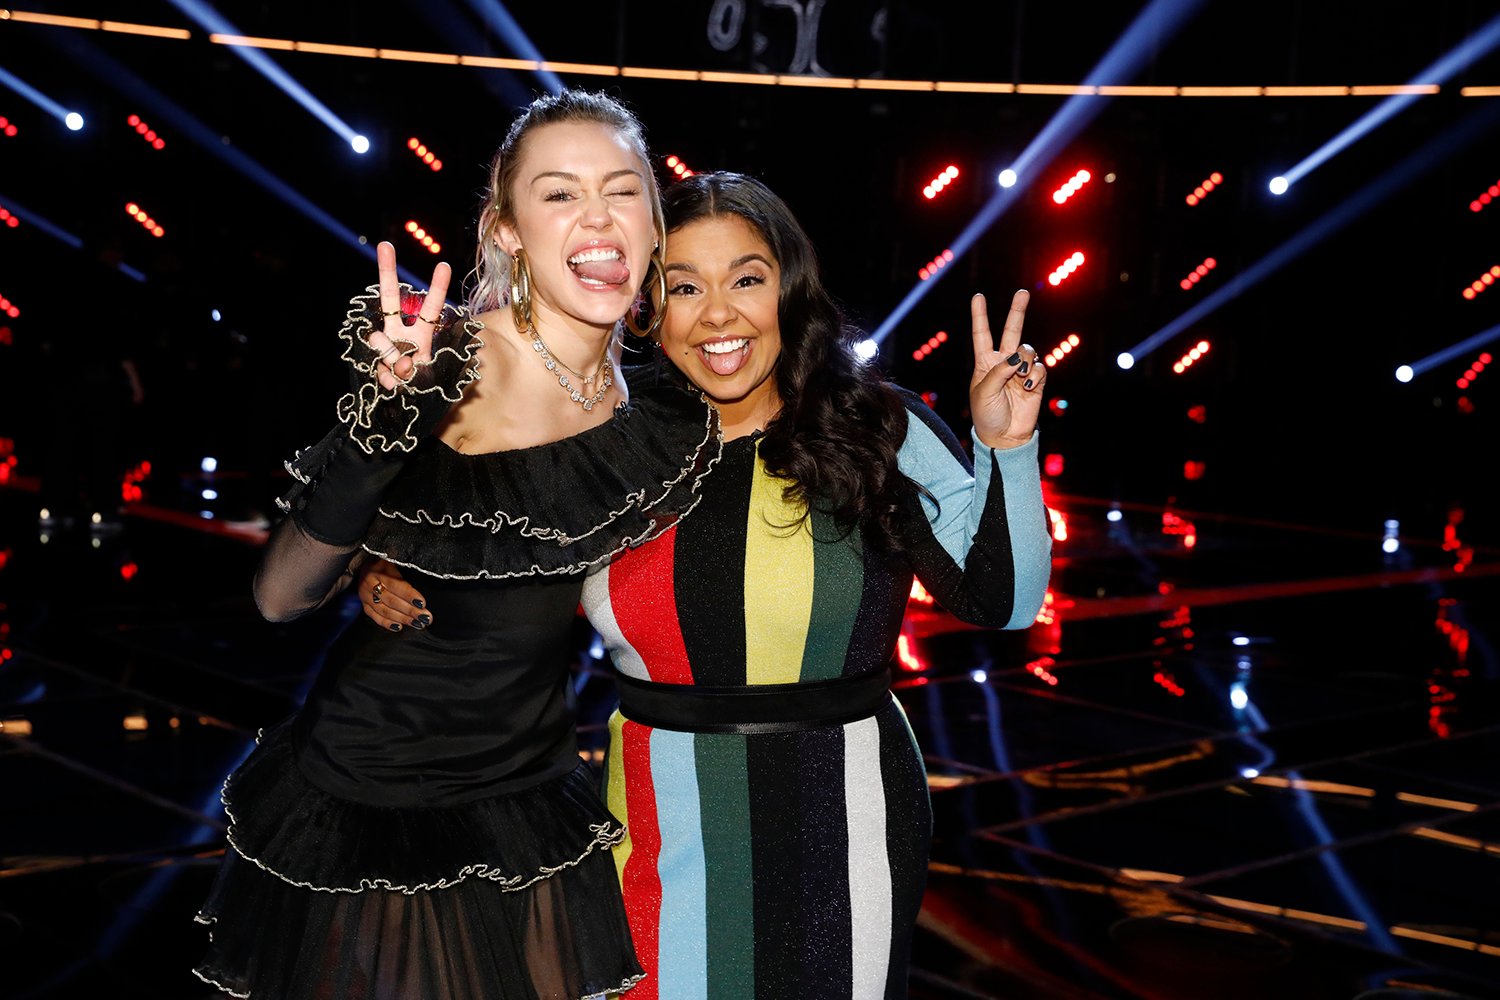 'The Voice' Season 13 contestant Brooke Simpson with coach Miley Cyrus